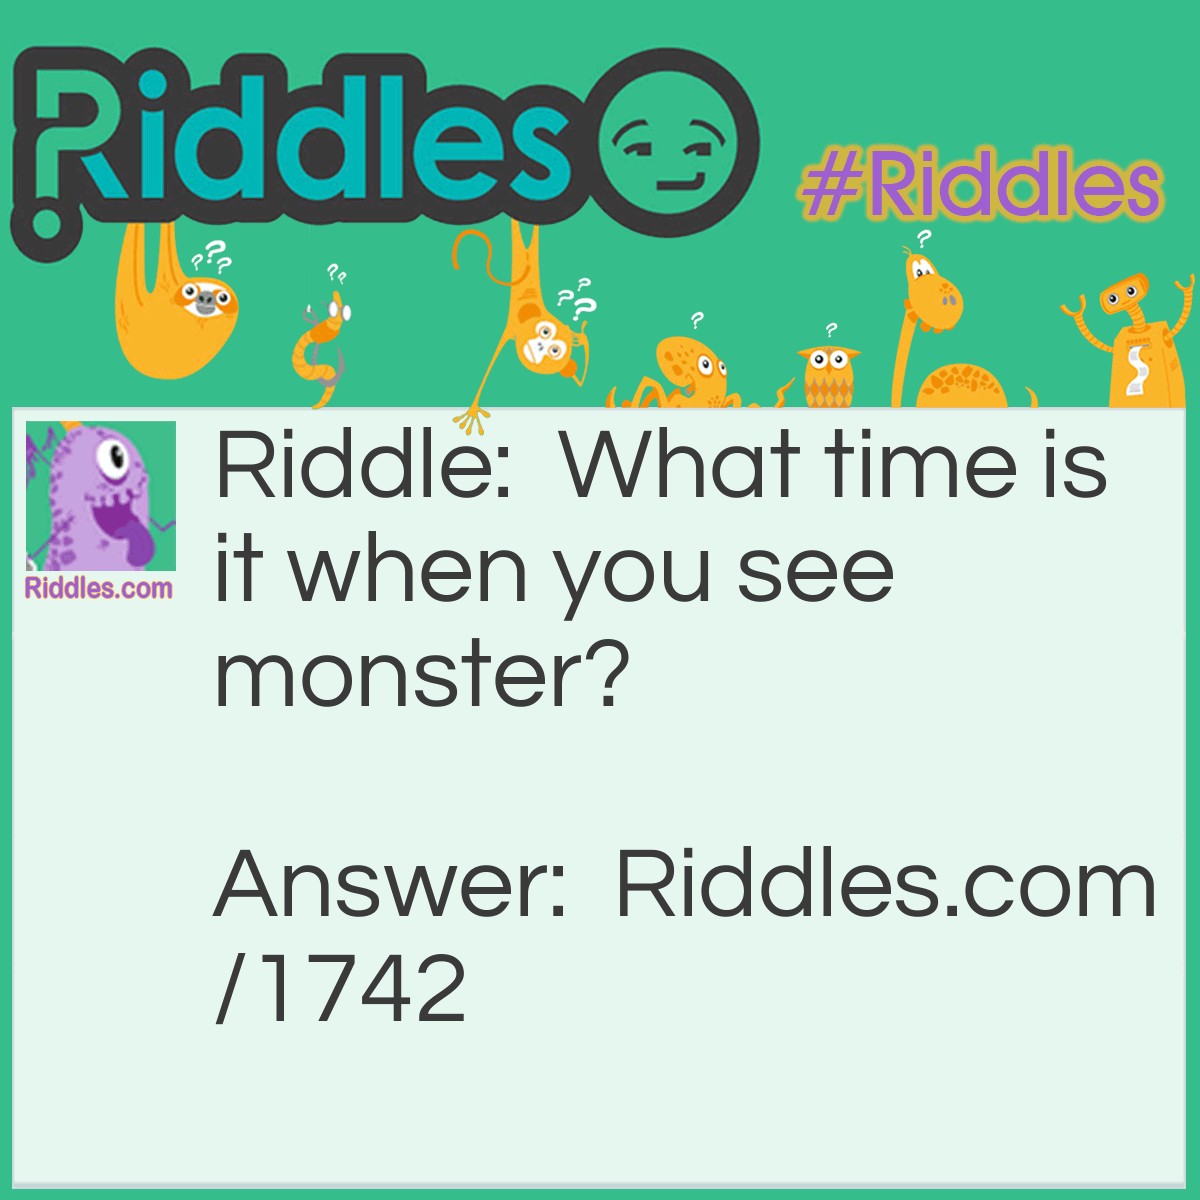 Riddle: What time is it when you see monster? Answer: Time to run.